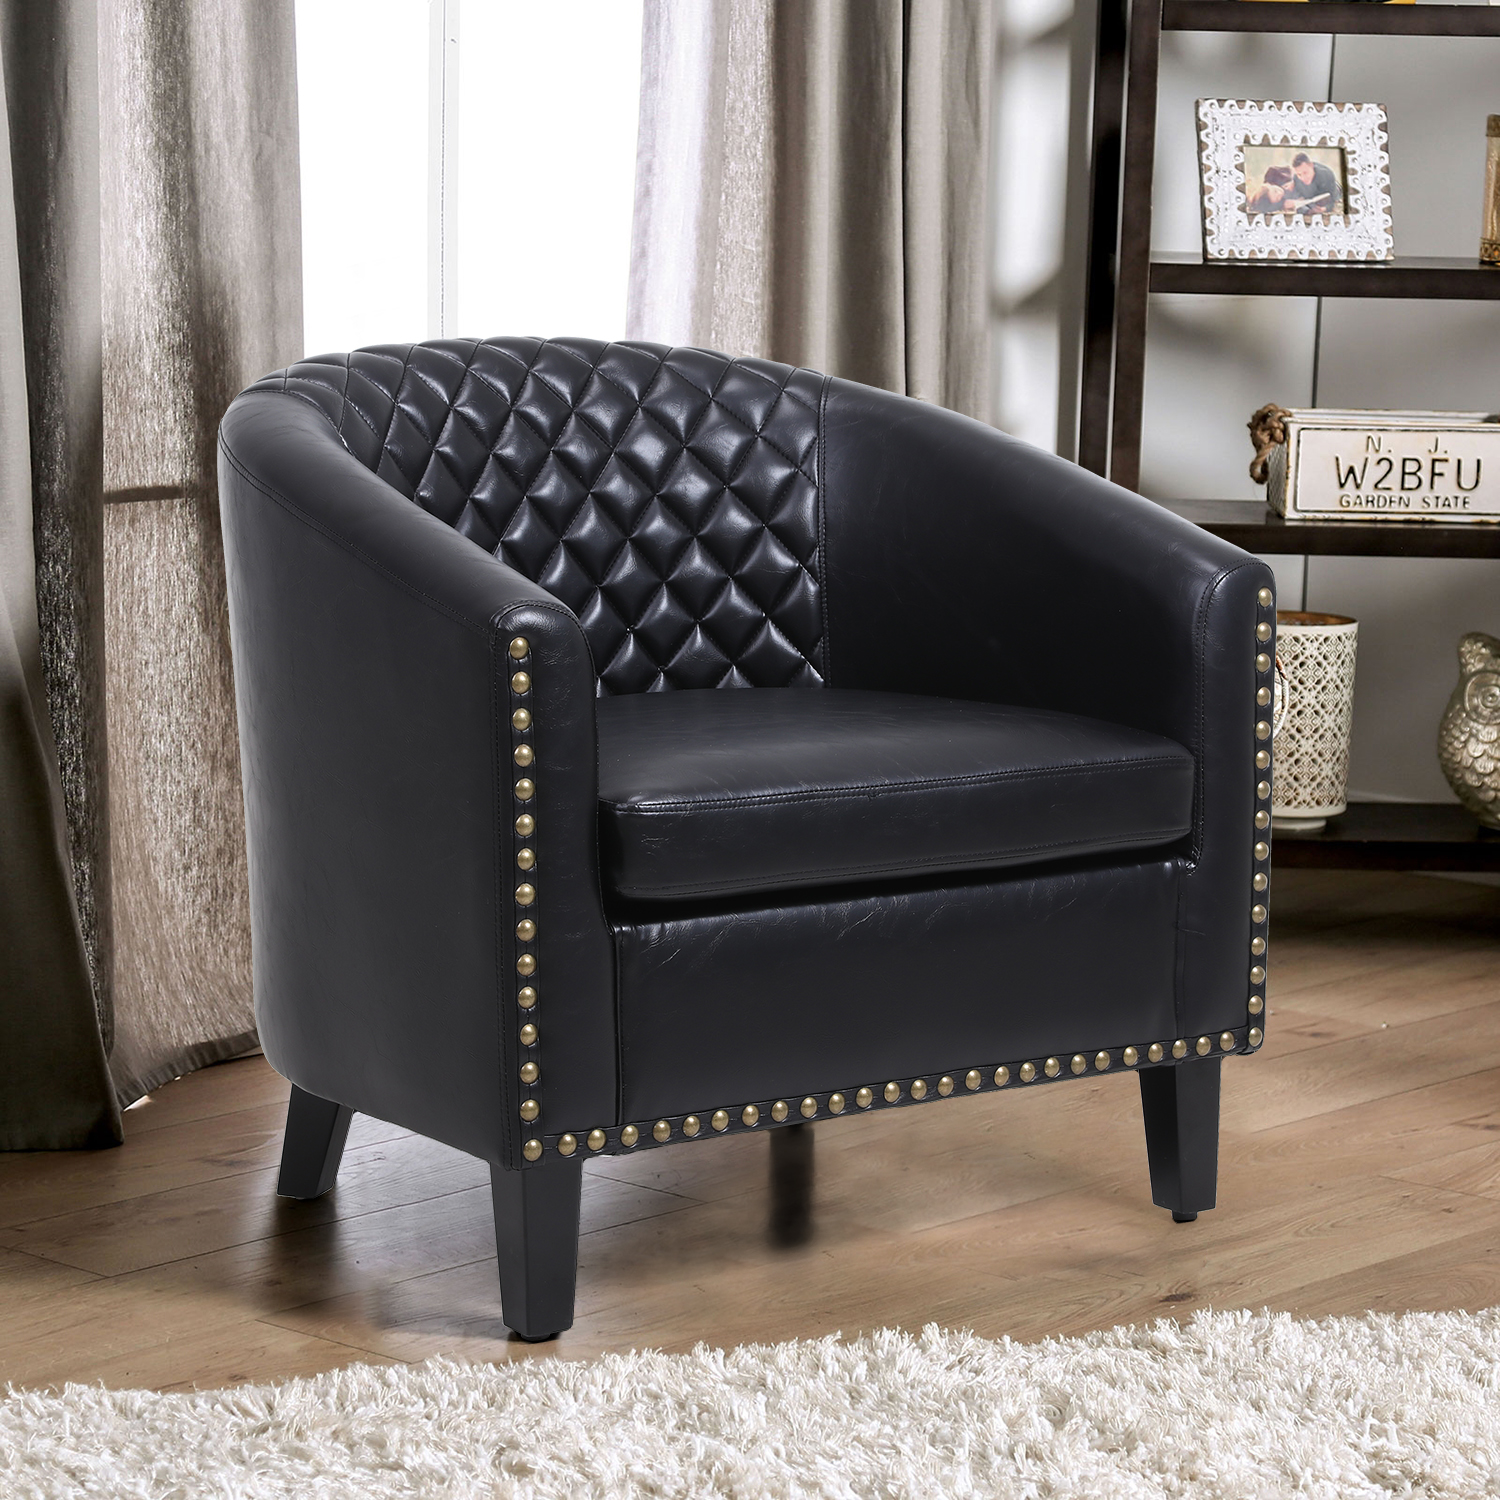 Modern Barrel Chair Tub Chair Faux Leather Club Chair with Arms and Nailheads, Upholstered Barrel Accent Chair for Living Room Bedroom - Black - image 1 of 8